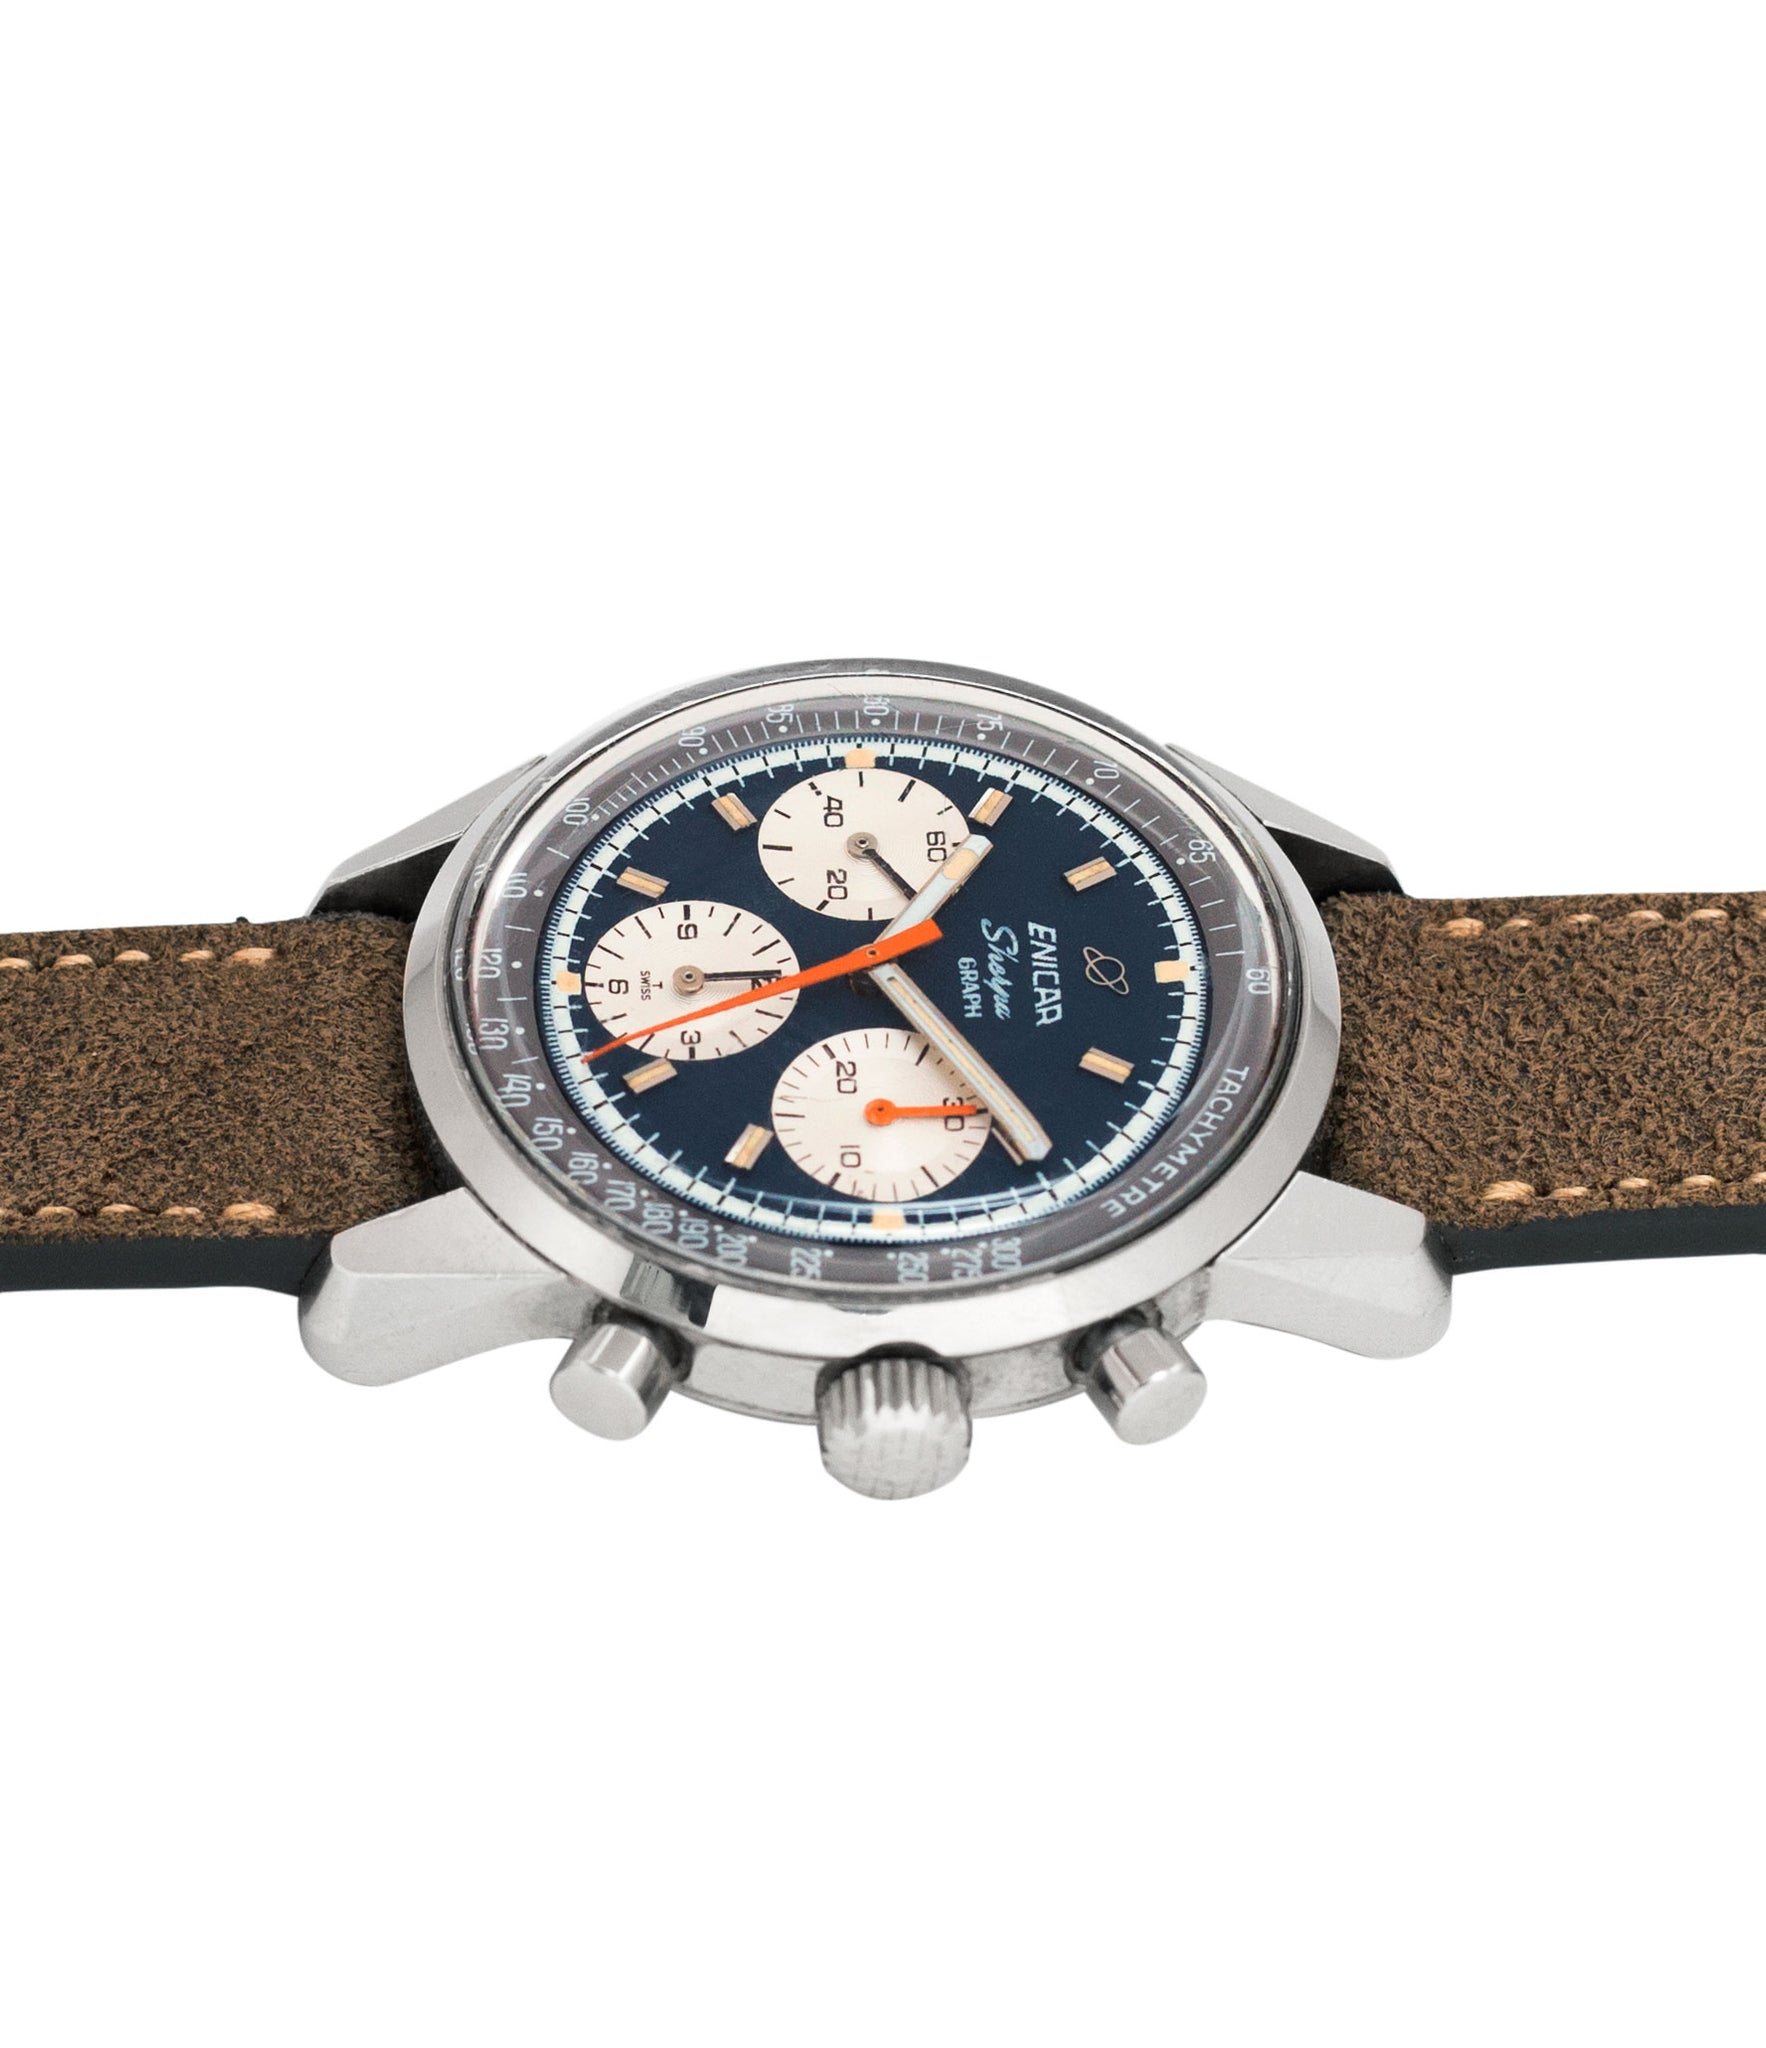 vintage Jim Clark Mark IV Enicar Sherpa Graph 300 Ref. 072-02-01 steel chronograph sport racing watch for sale online at A Collected Man London UK vintage watch specialist